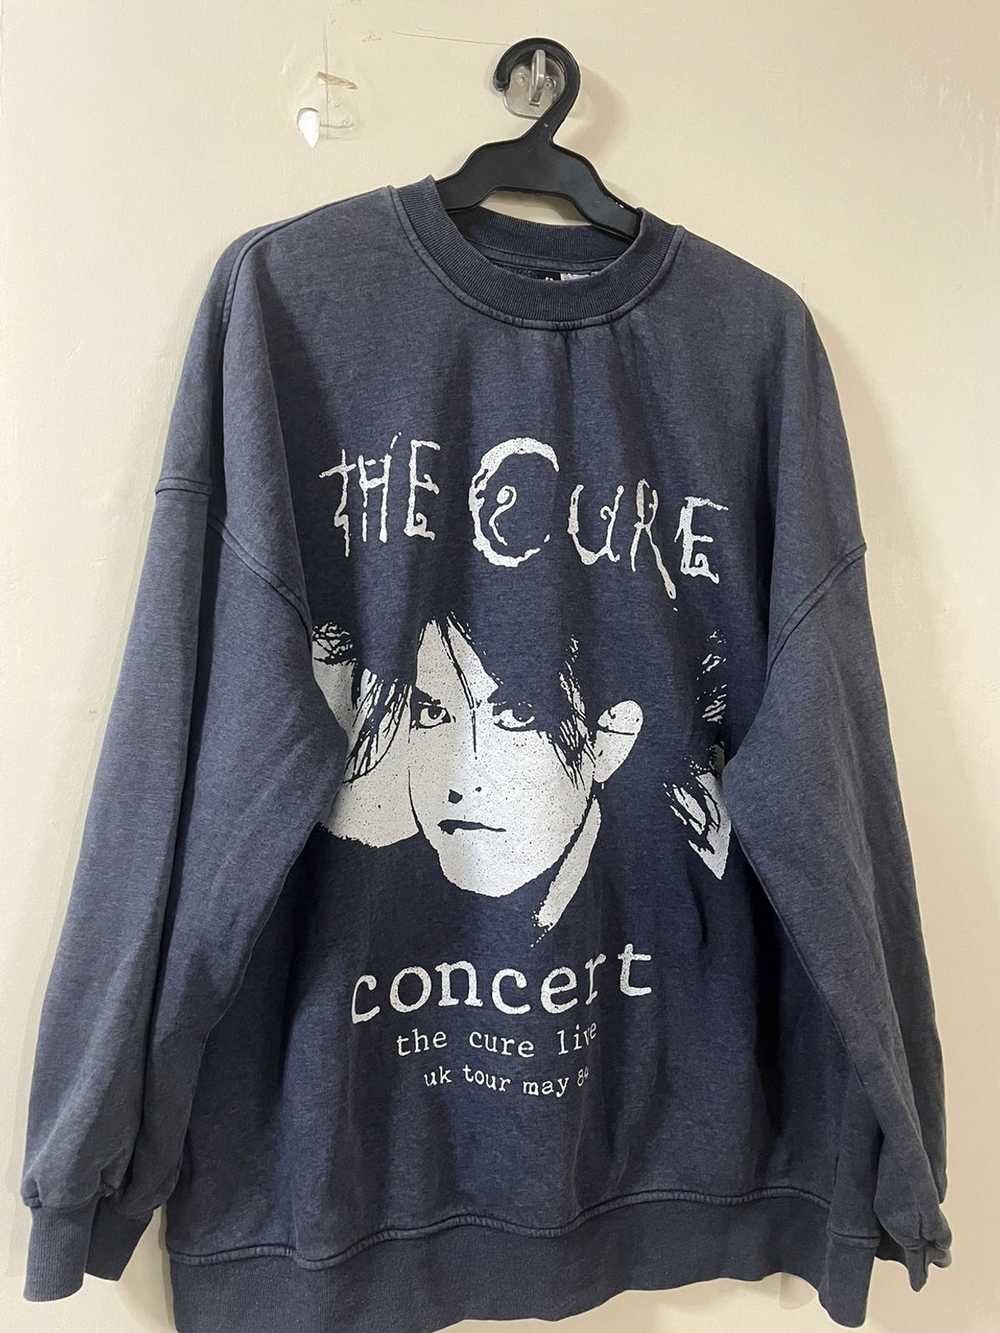 Band Tees Oversized Crewneck The Cure - image 4